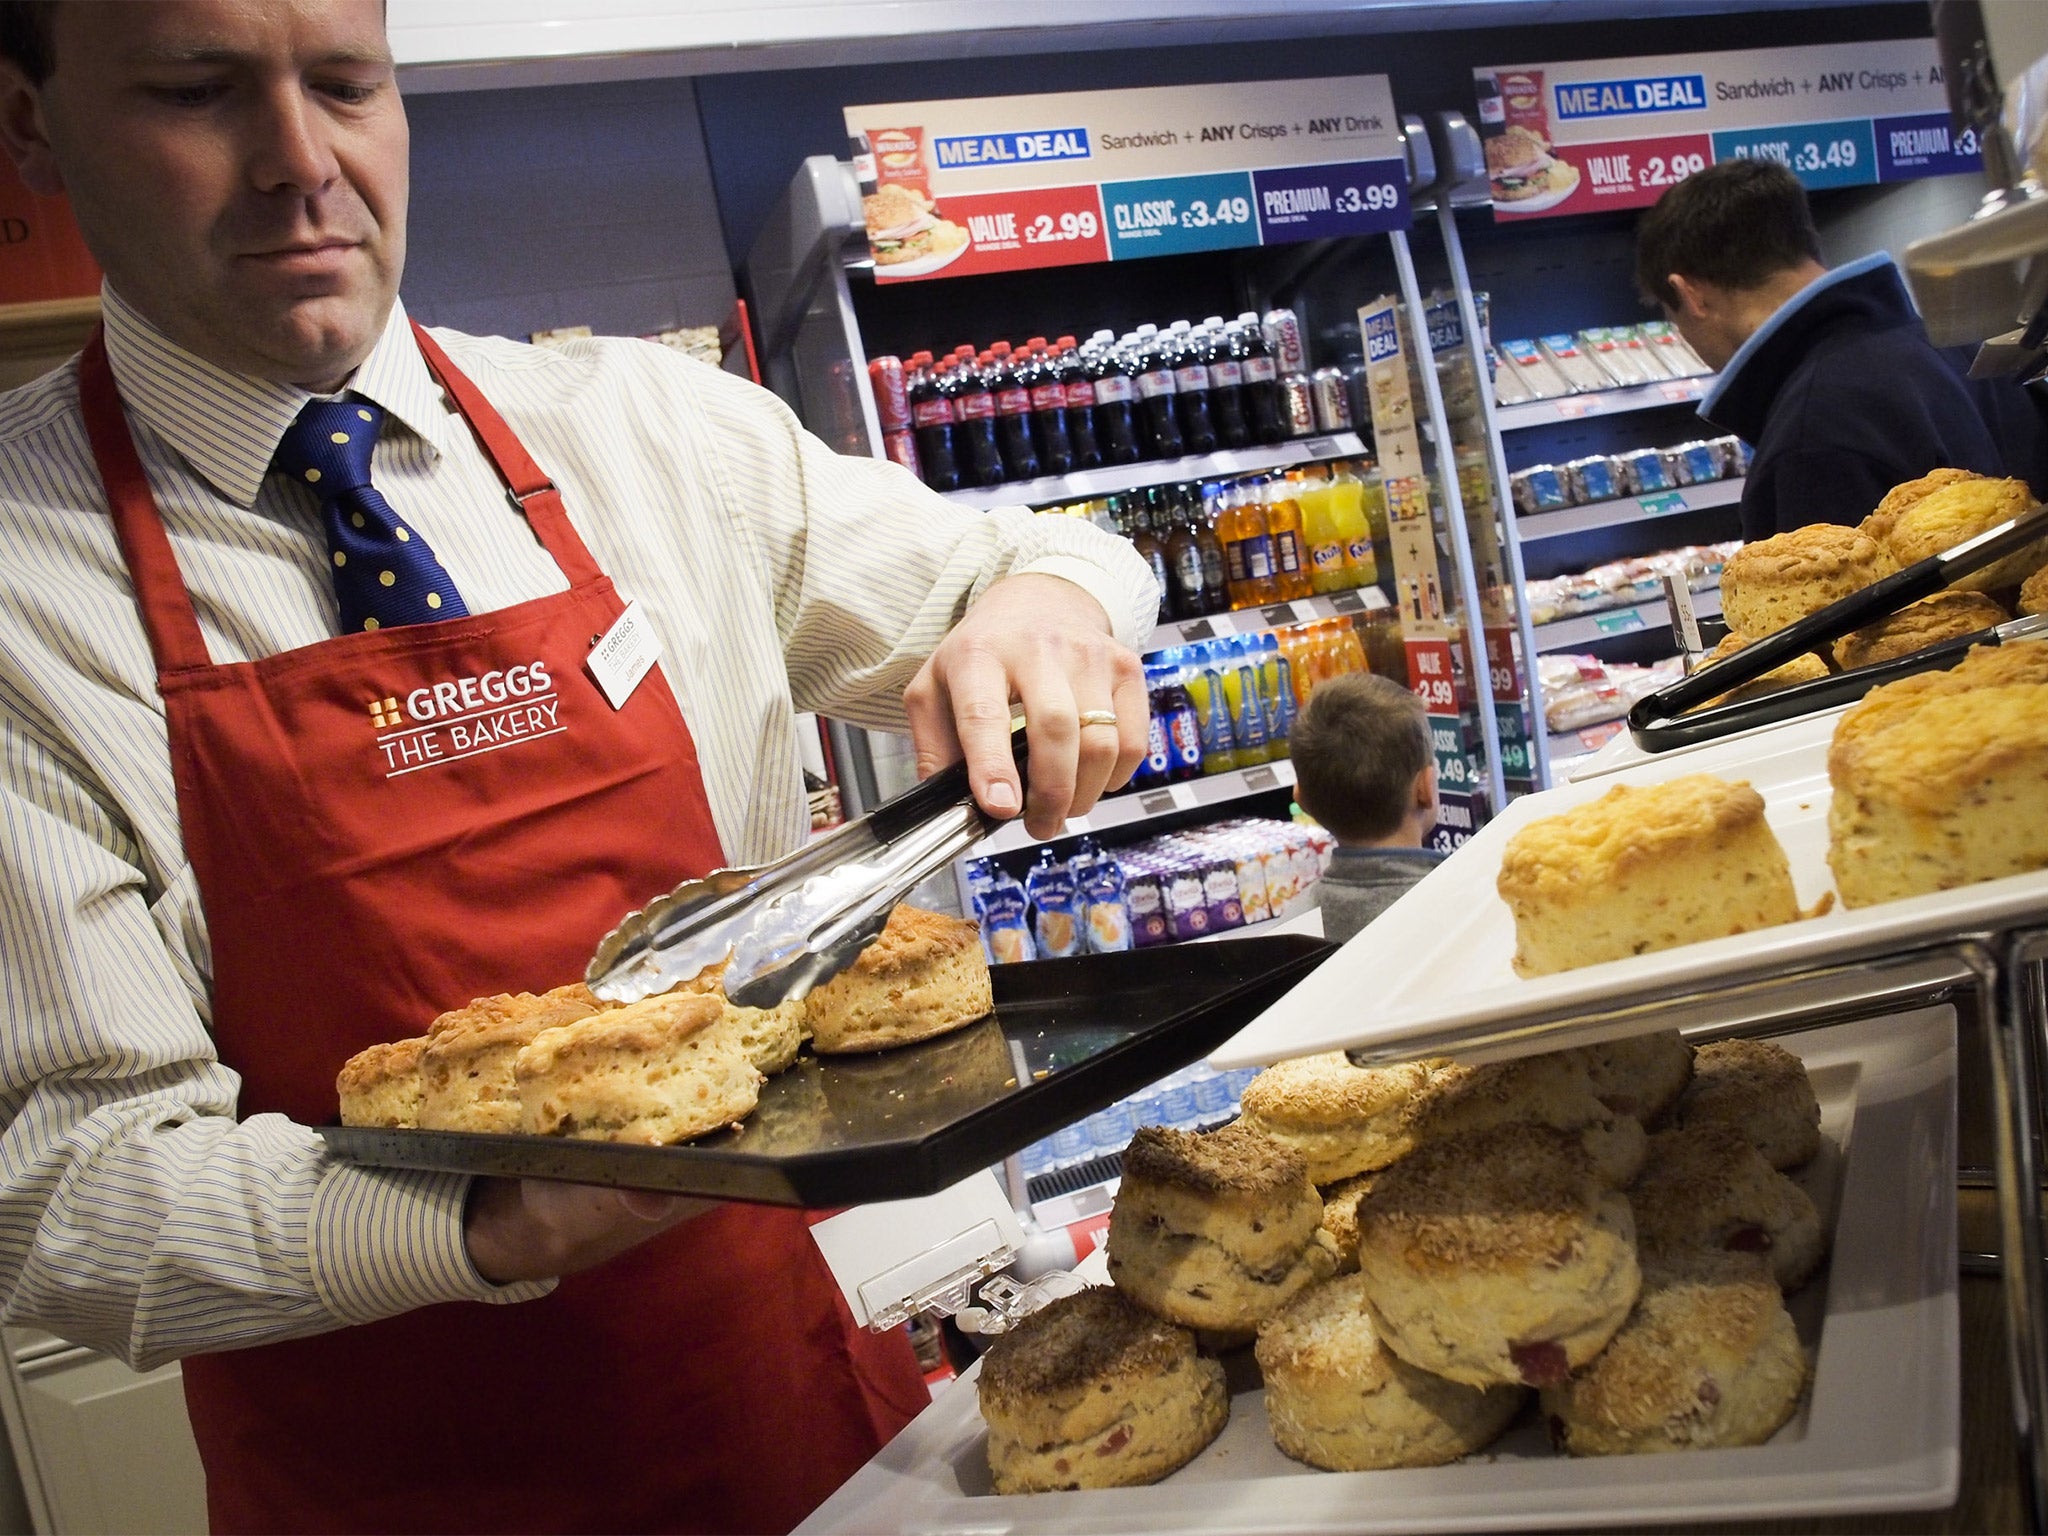 In 1600 Greggs stores around the UK, sandwiches are made daily and savoury pastries baked during the day